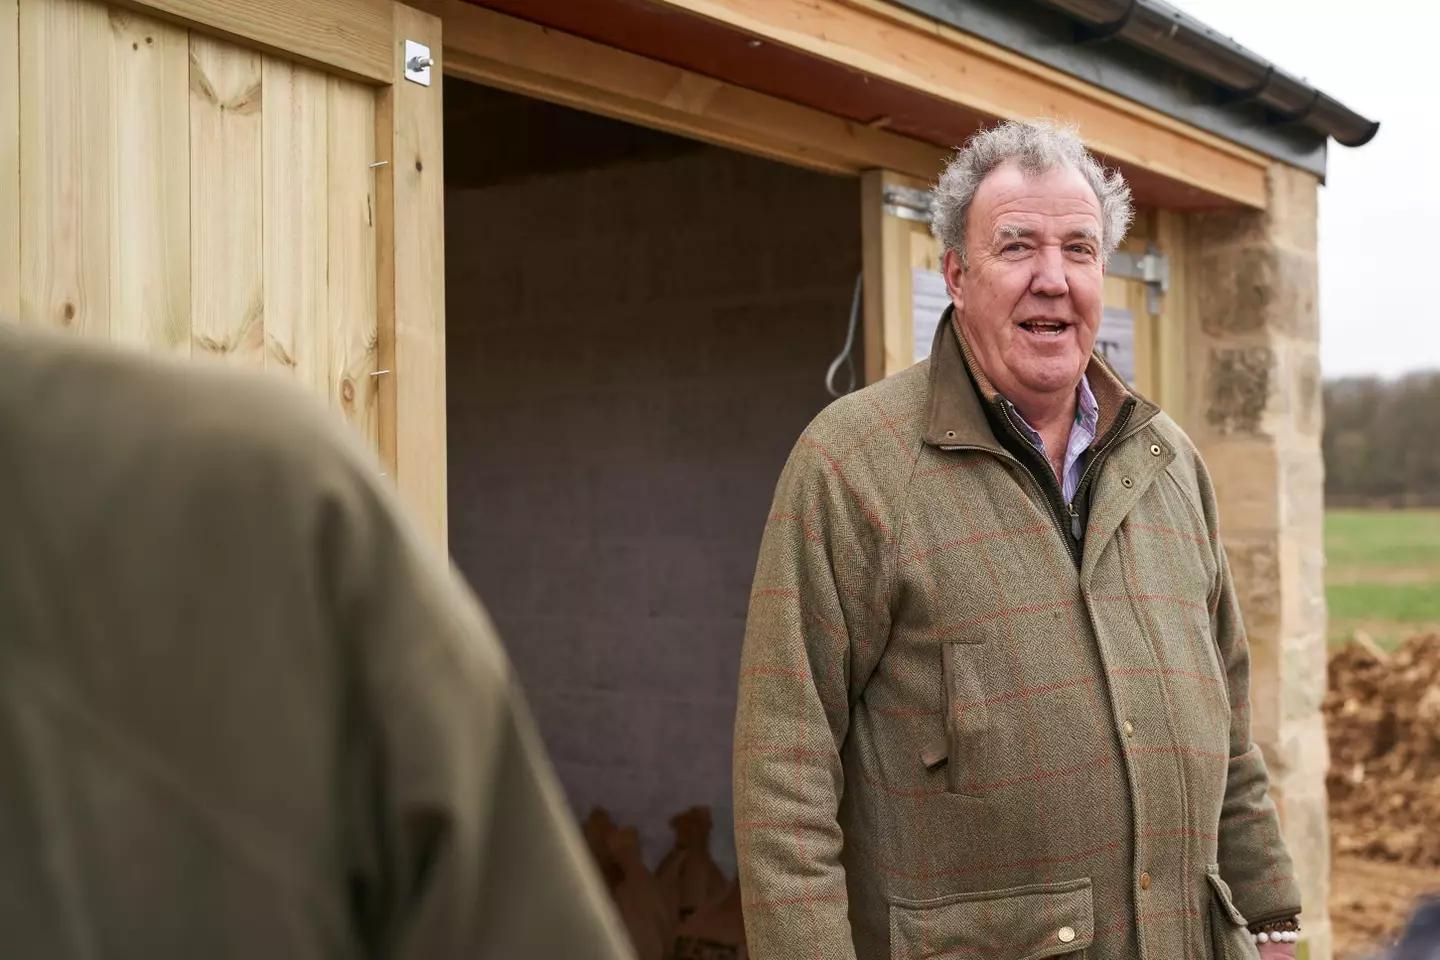 A councillor revealed Jeremy Clarkson had appealed the order to shut down his restaurant.